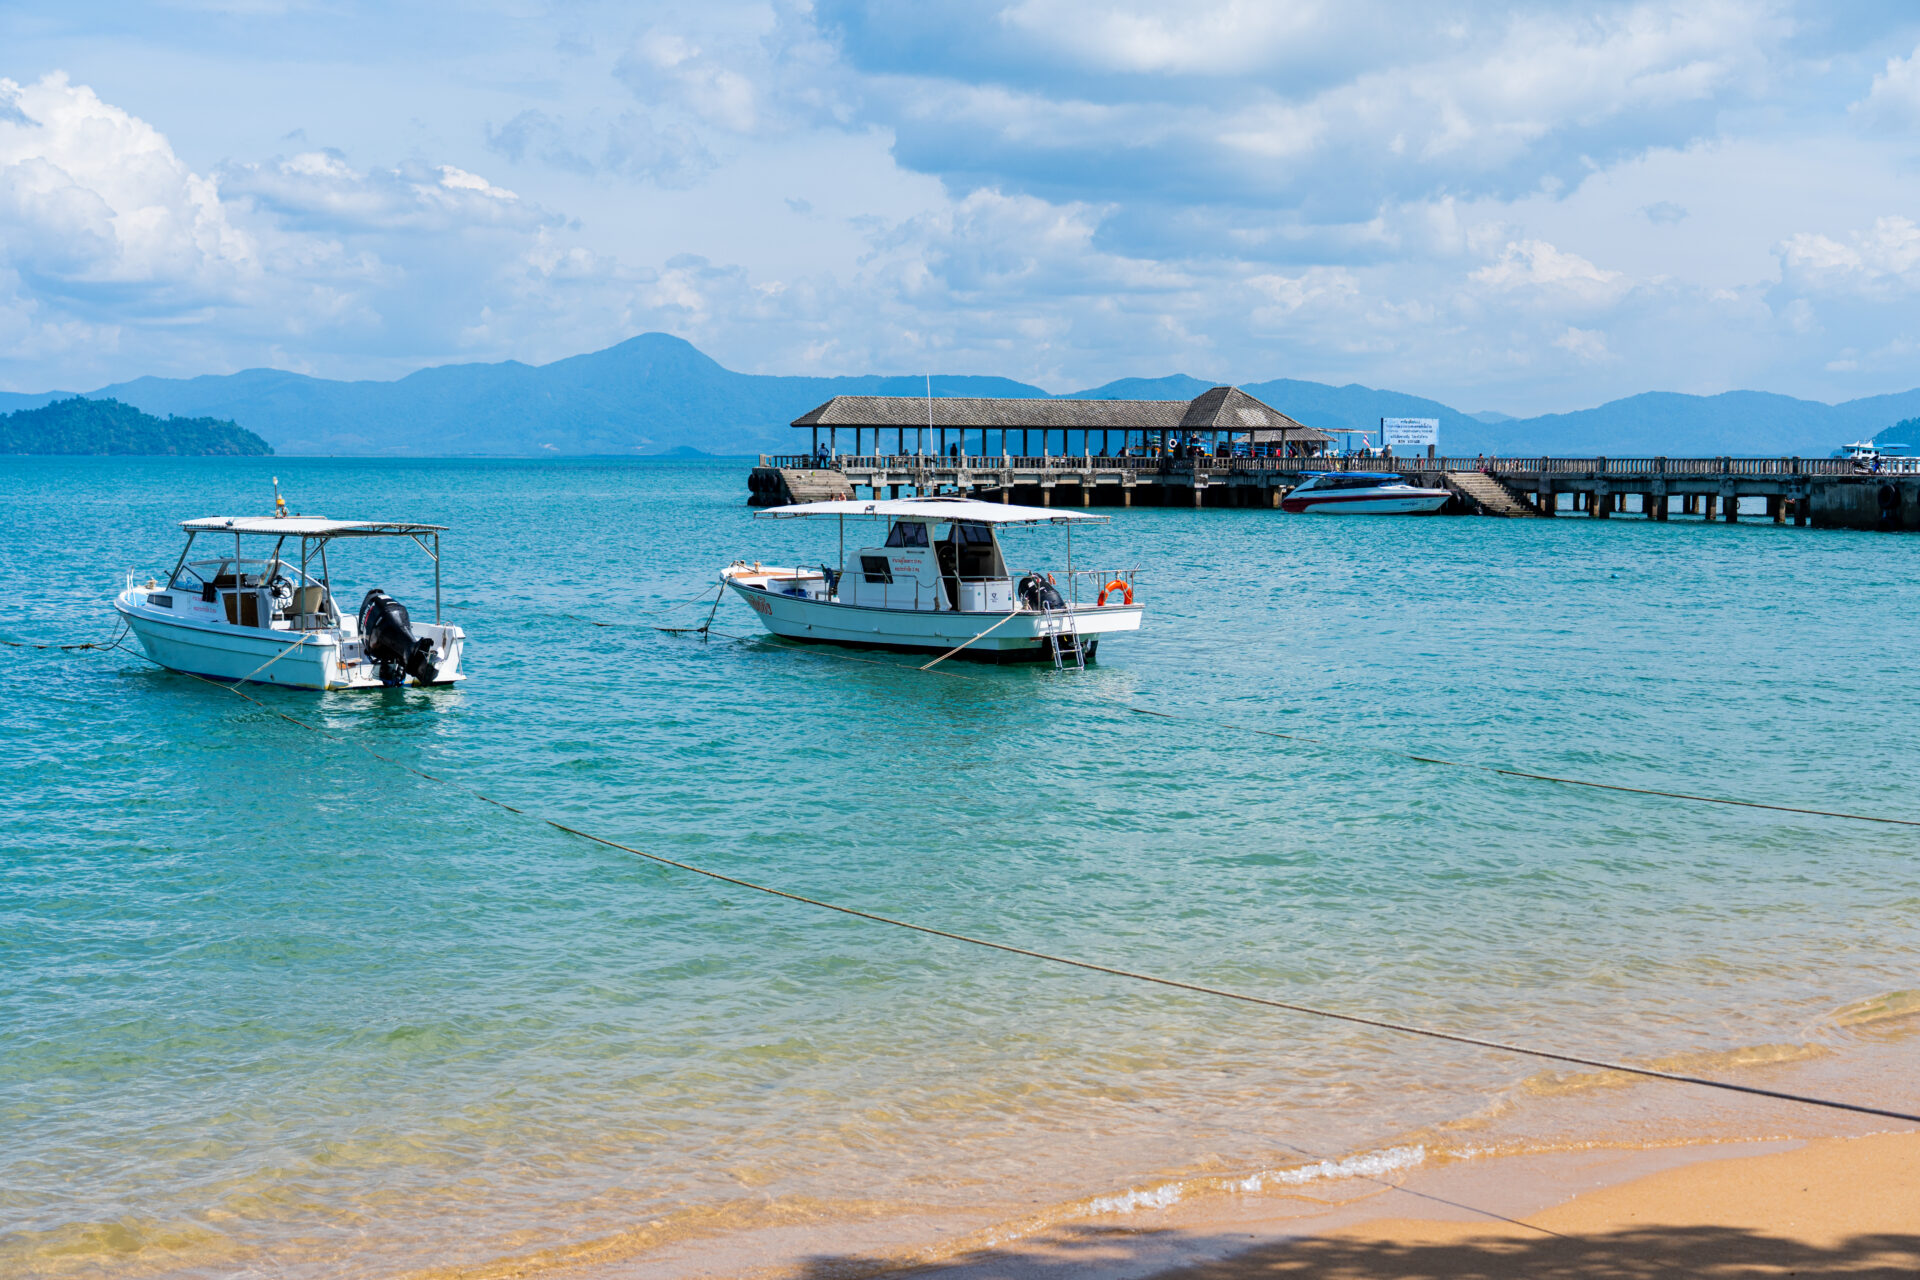 BEST FREE AND BUDGET-FRIENDLY ACTIVITIES IN KOH PHAYAM, THAILAND